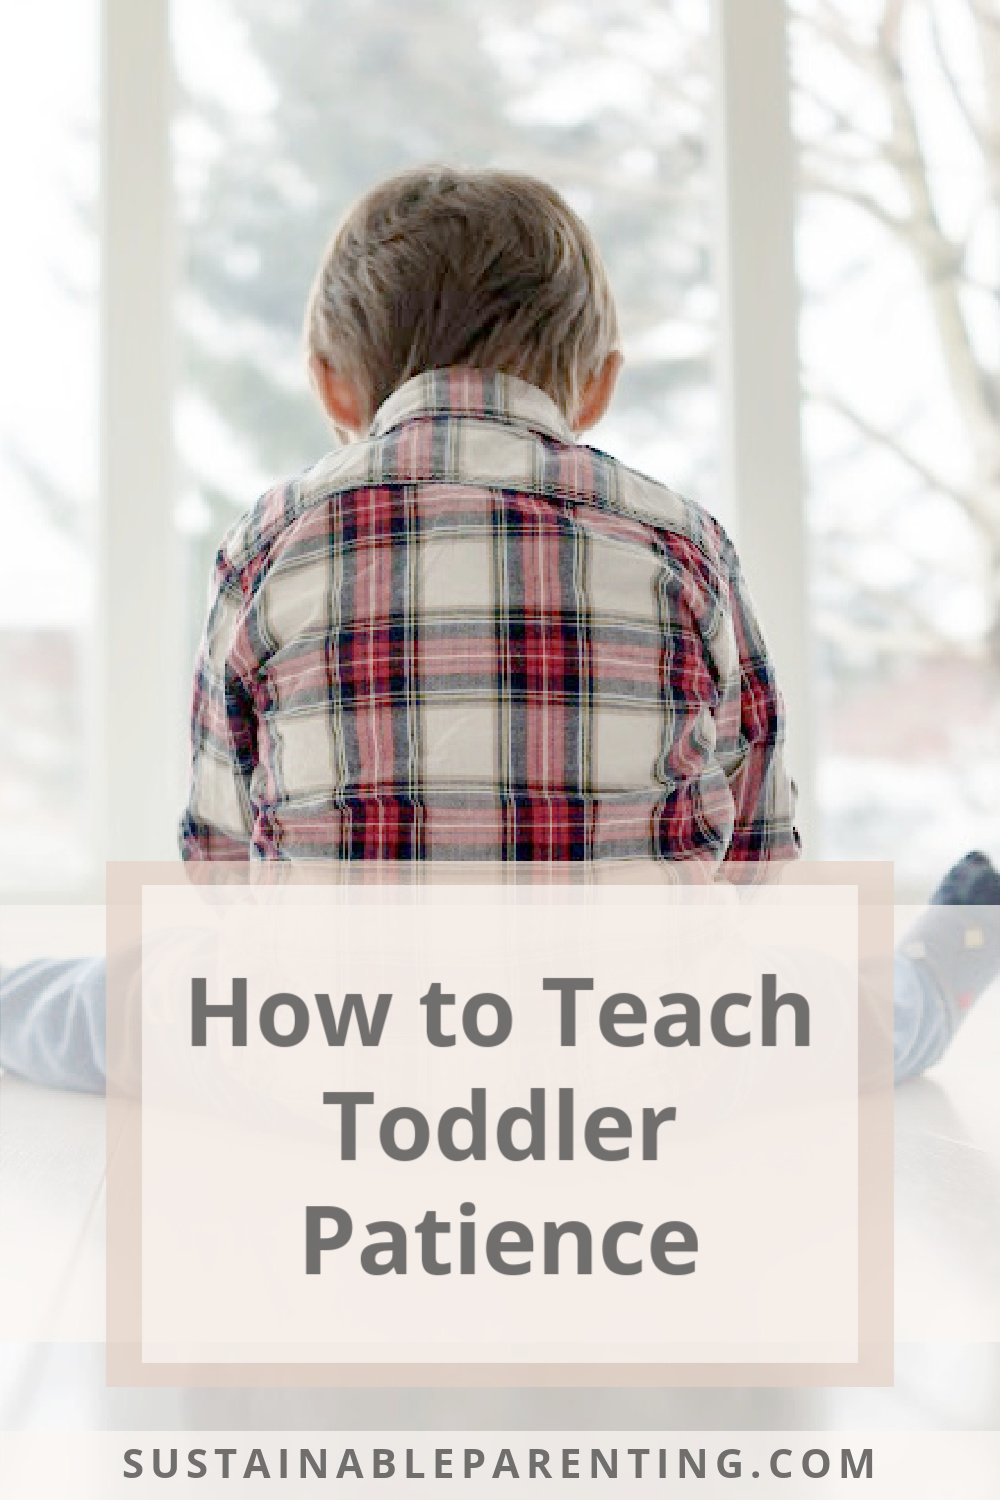 How to Teach Toddler Patience